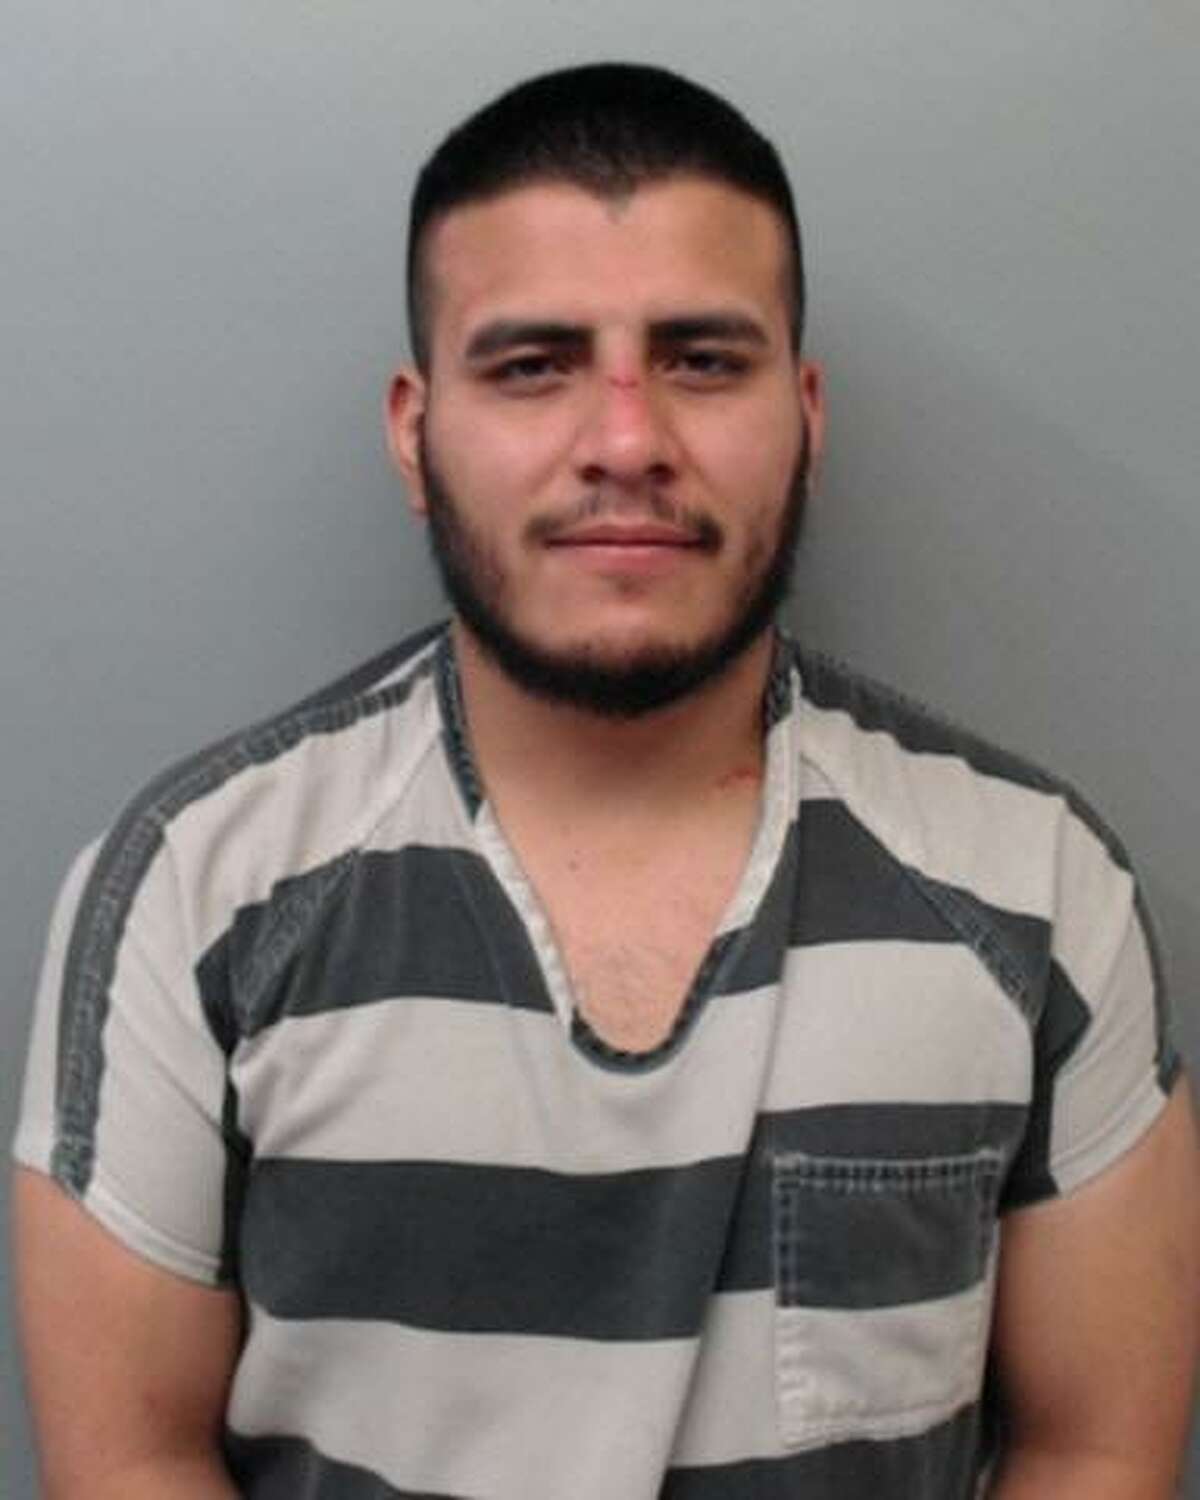 Adrian Fernando Flores, 22, was charged with assault on a public servant, evading arrest, resisting arrest and failing to give identification.